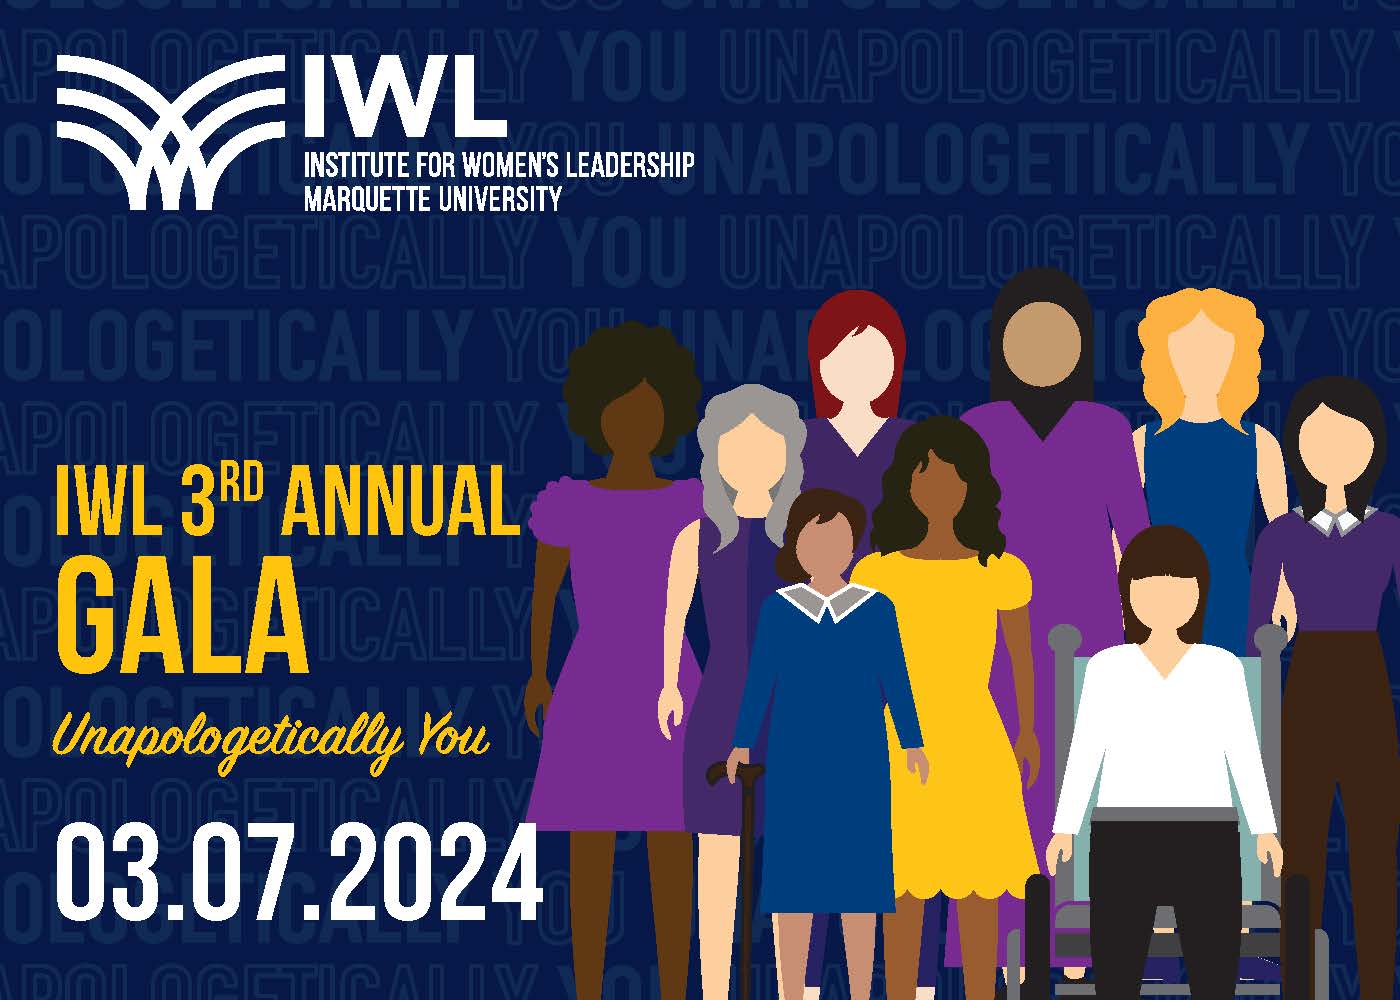 Save-the-Date Announcement for IWL-Marquette's 3rd Annual Gala